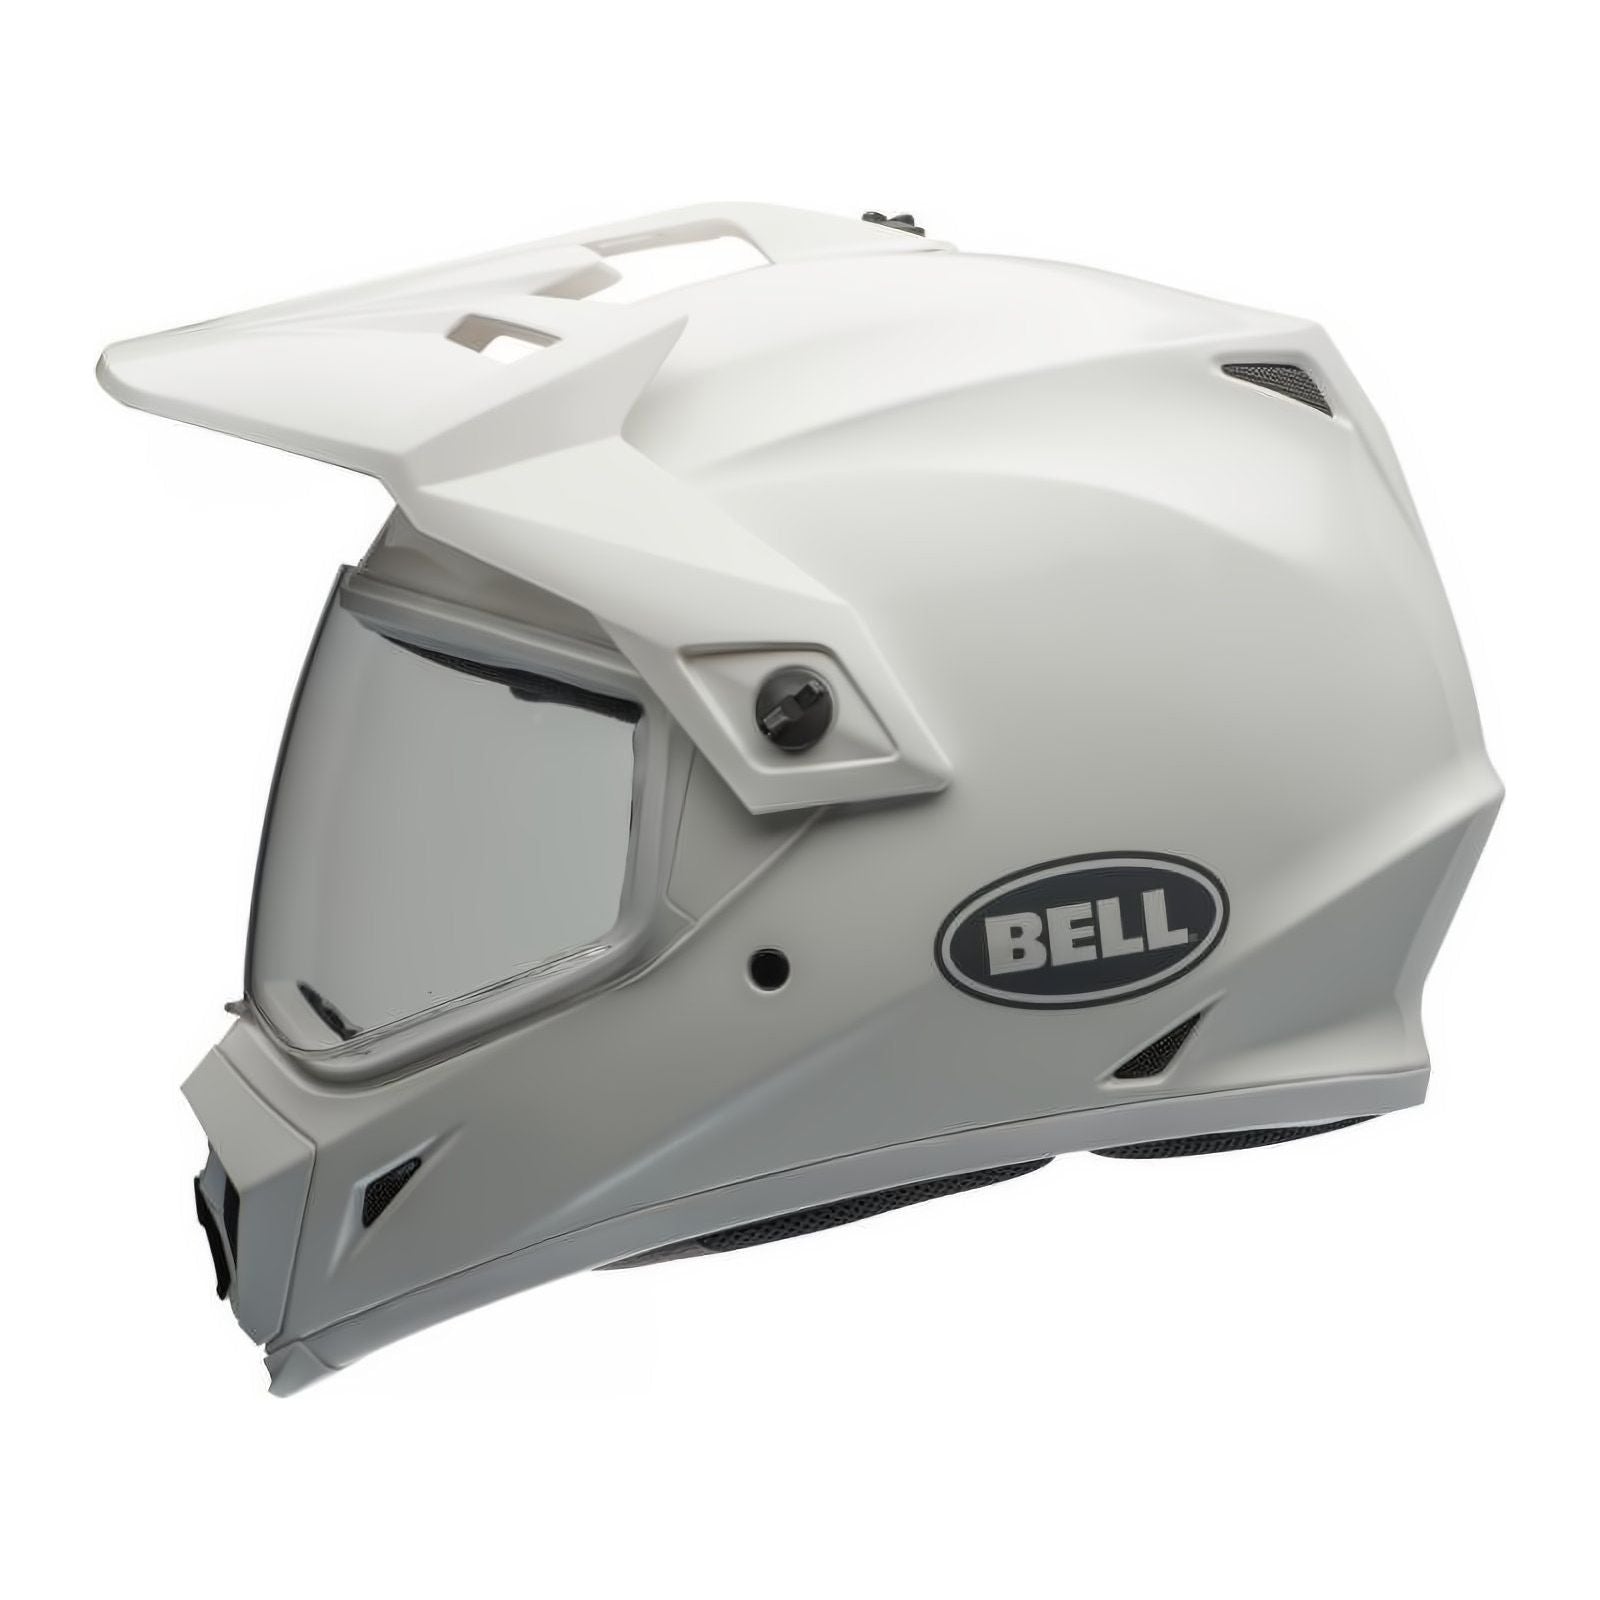 Bell casque MX-9 Adventure MIPS Gloss White - EdTools